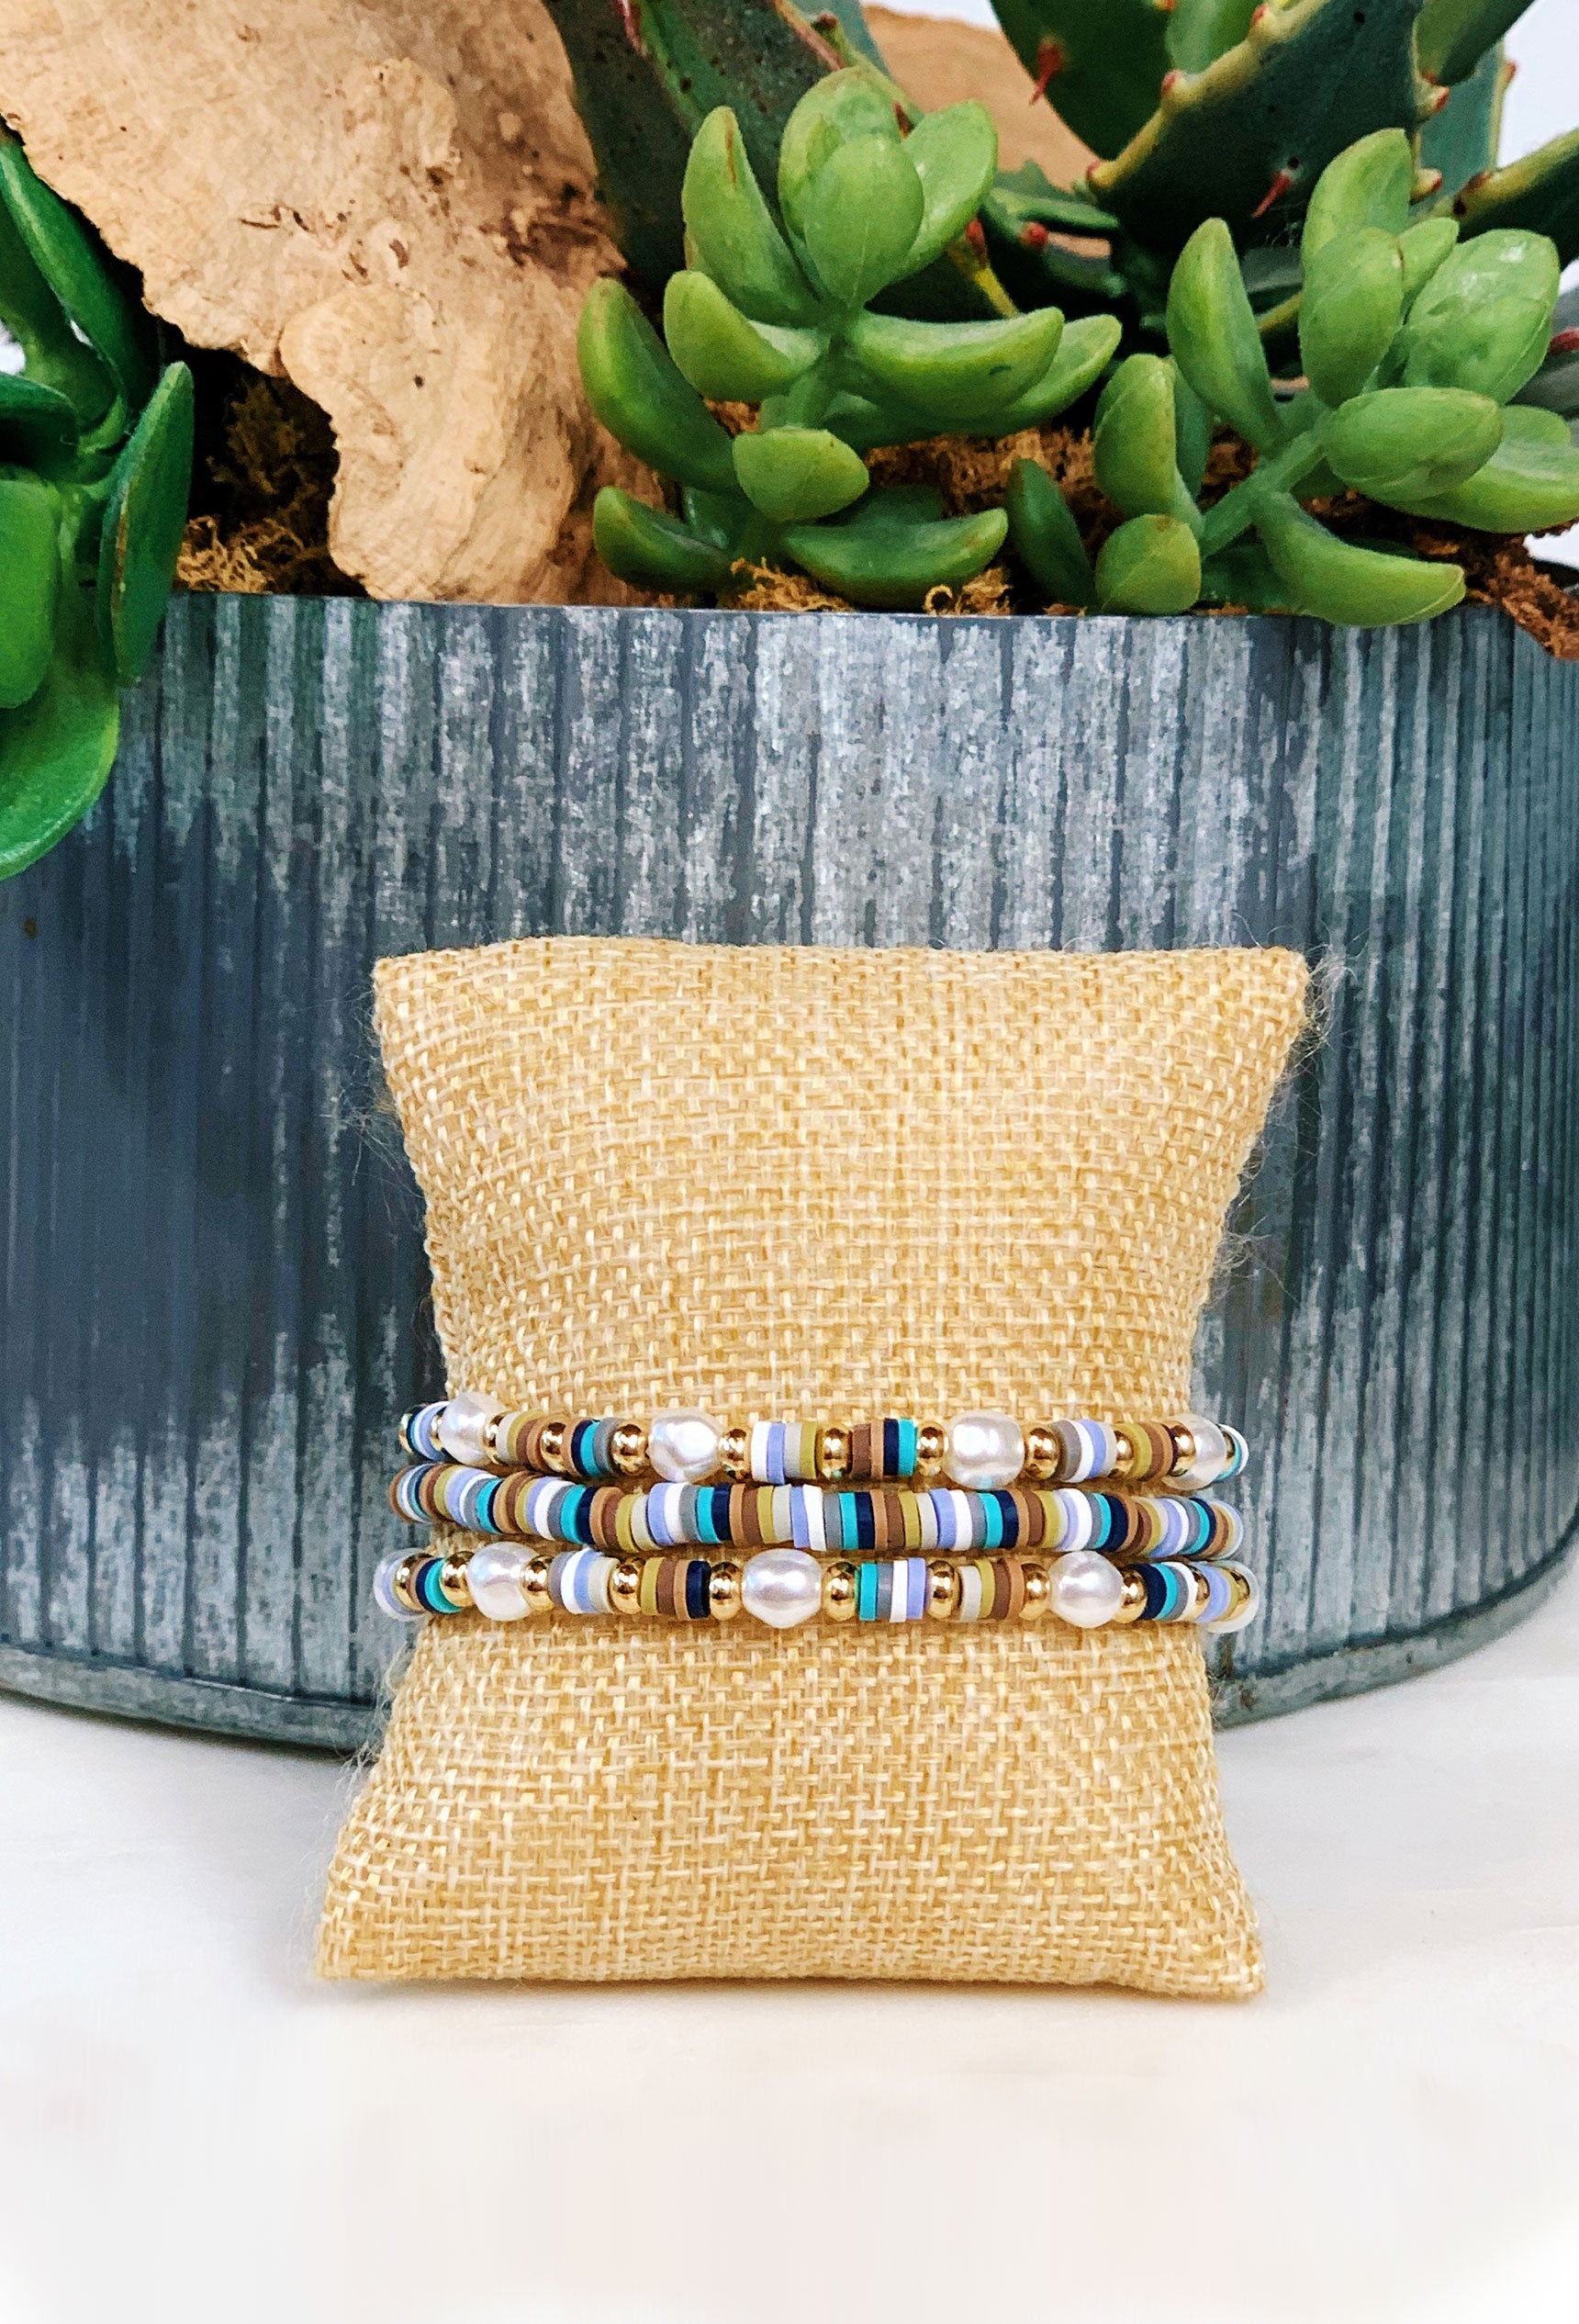 Karma Pearl Bracelets in Turquoise, blue hue vinyl disc bracelets with pearl beads 